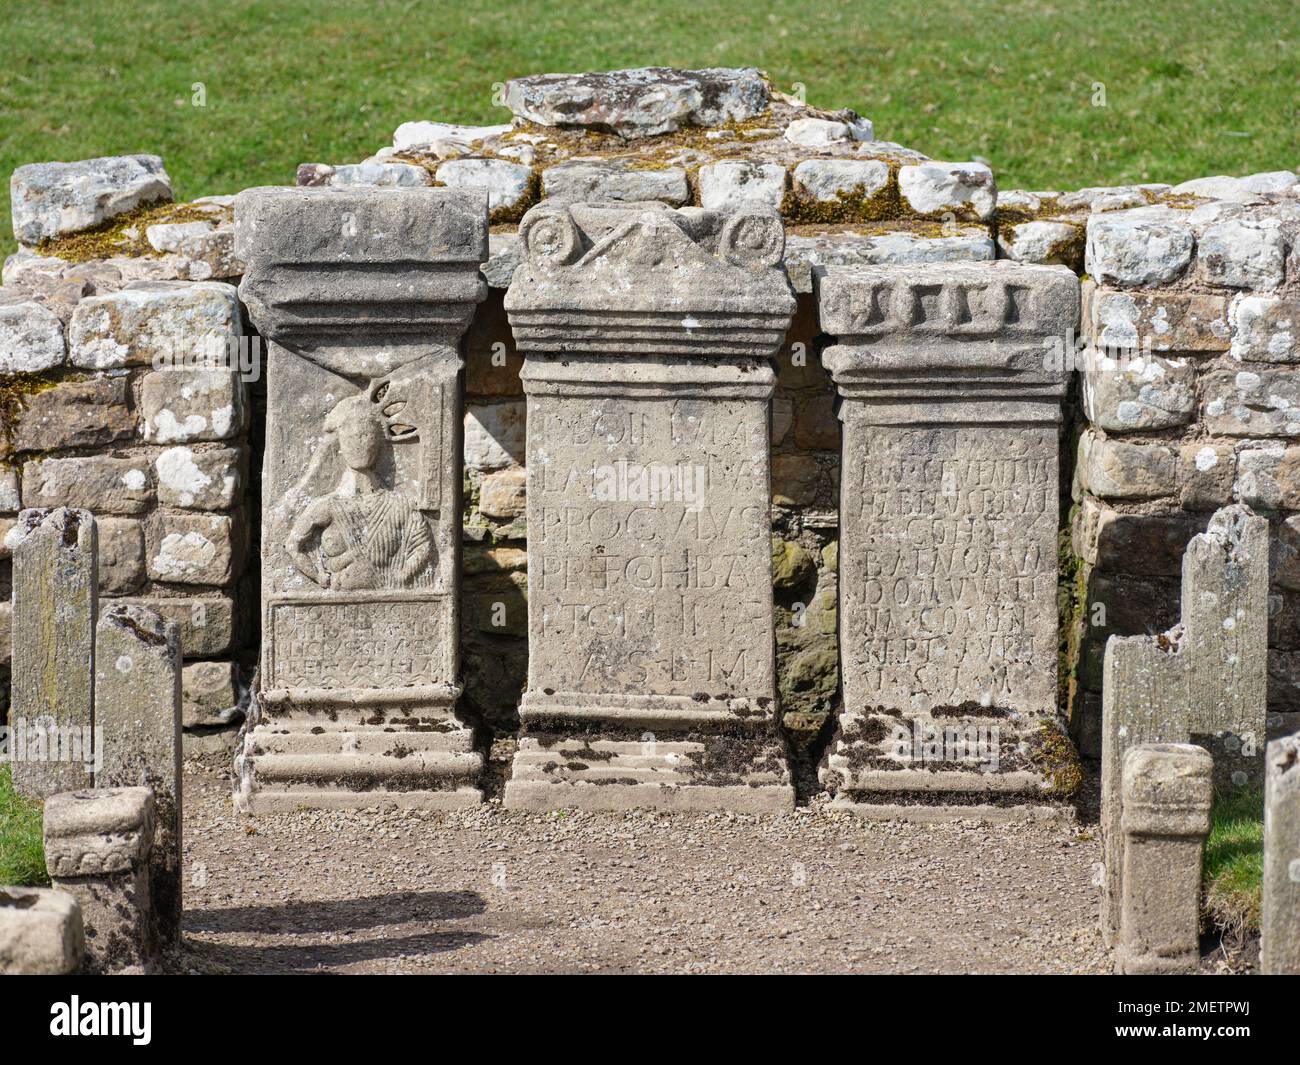 The altar stones in the Mithraic temple of Brocolitia along the route of Hadrian's Wall in the Northumberland National Park, England Stock Photo